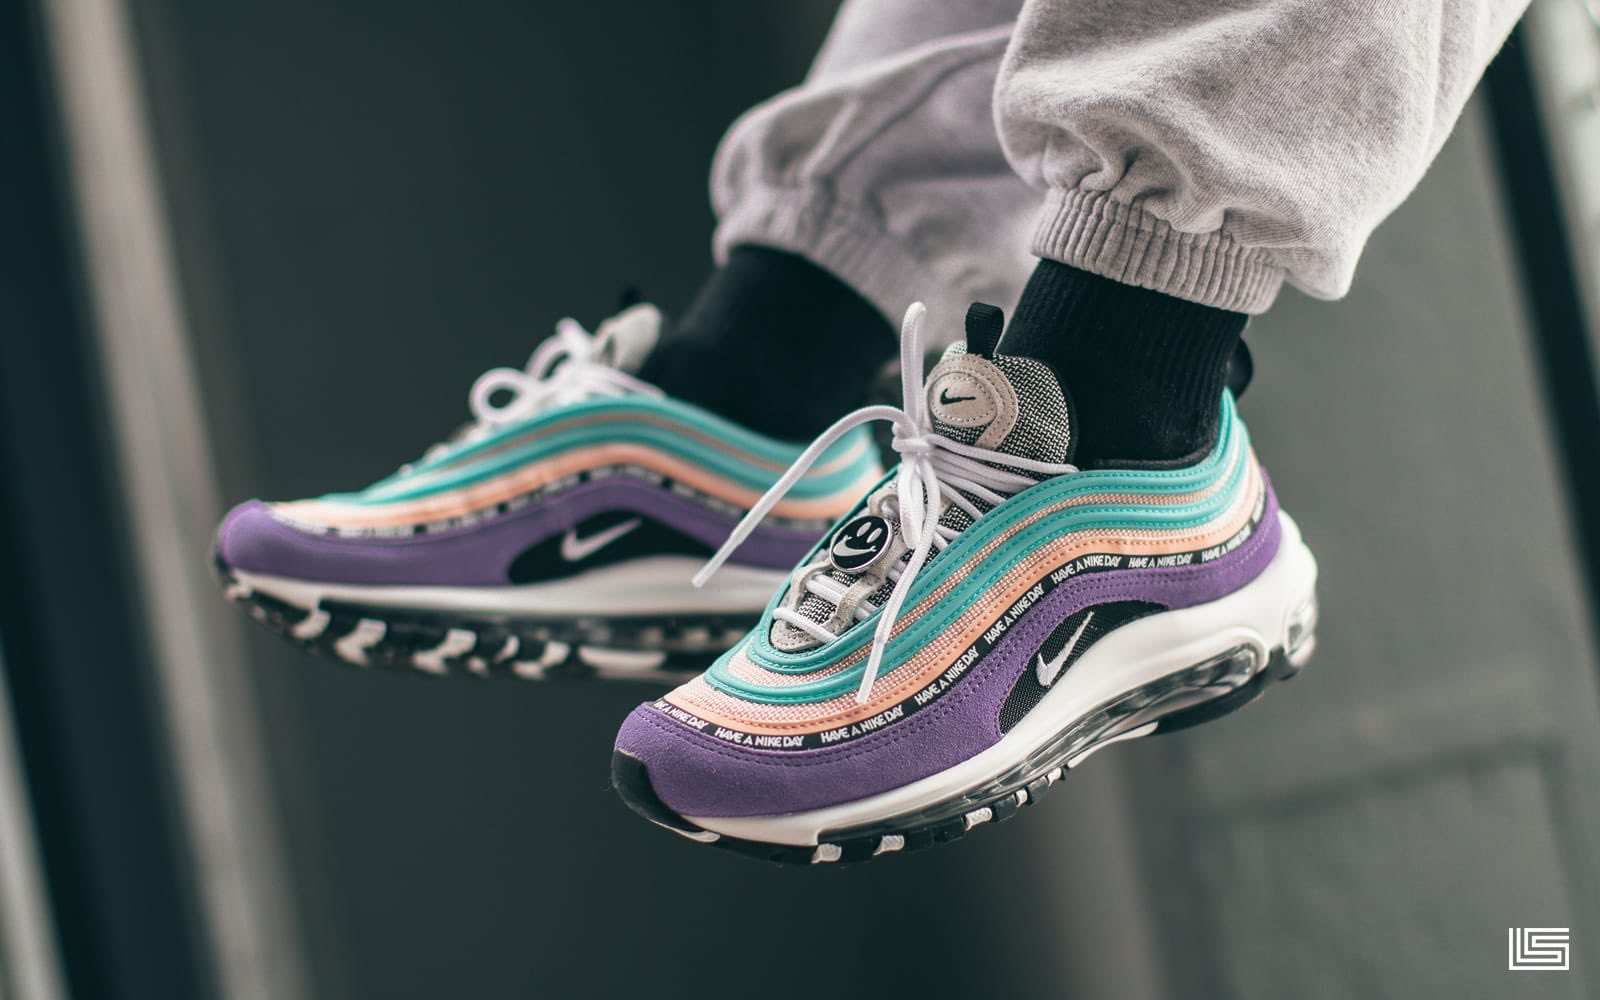 SNKR_TWITR on Twitter: "Nike Air Max 97 'Have a Nike Day' still available here with free shipping Champs https://t.co/lbTyXAdcMx Footaction Footlocker https://t.co/ABk390wUgj Nike https://t.co/cs6kHtgrrW Shoepalace https://t.co ...